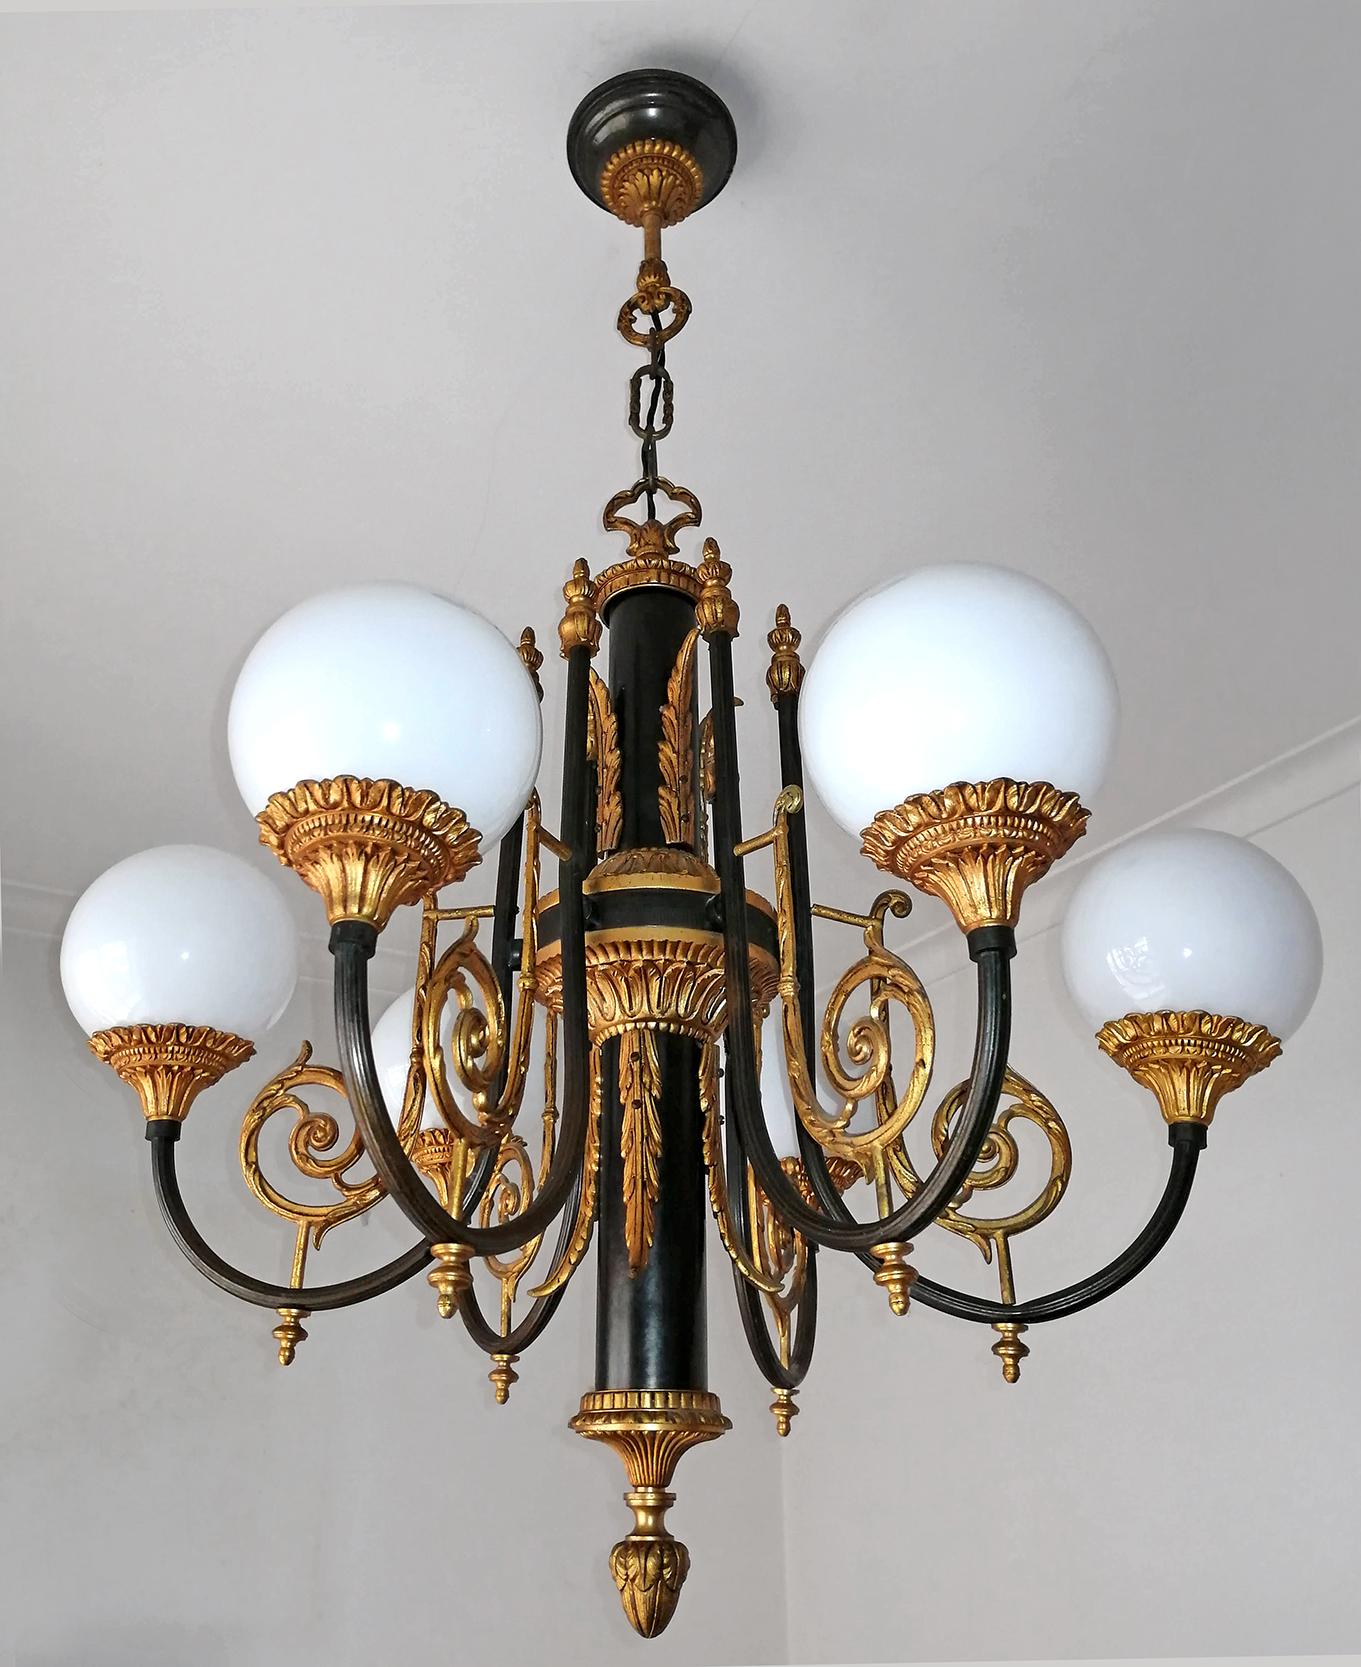 Antique French Empire Neoclassical Gilt & Patina Bronze Opaline Globe Chandelier For Sale 4